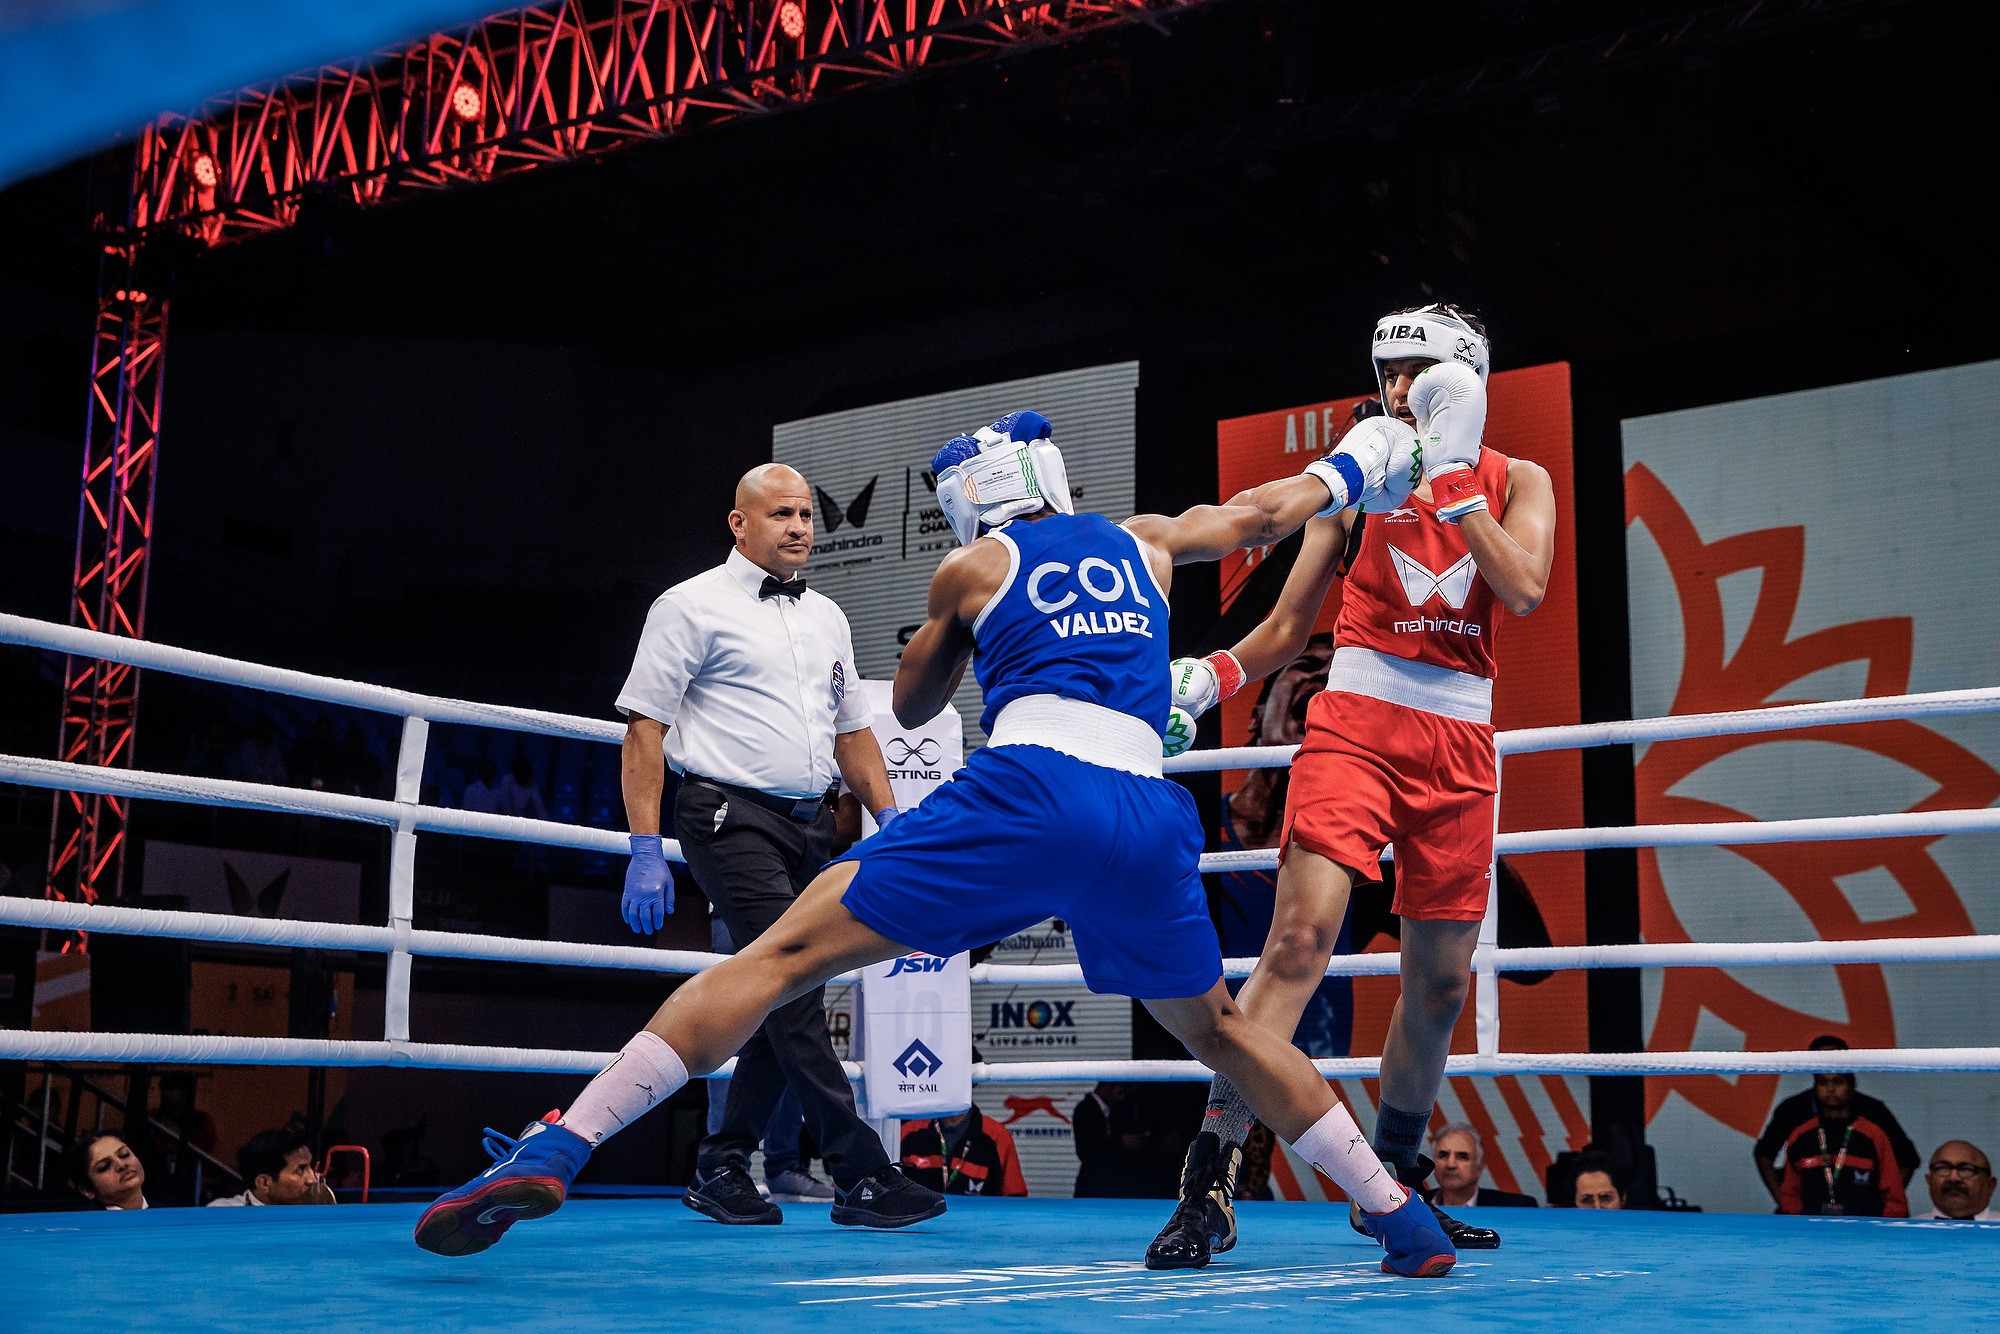 Colombia have four boxers competing in the semi-finals after receiving financial assistance from the IBA ©IBA